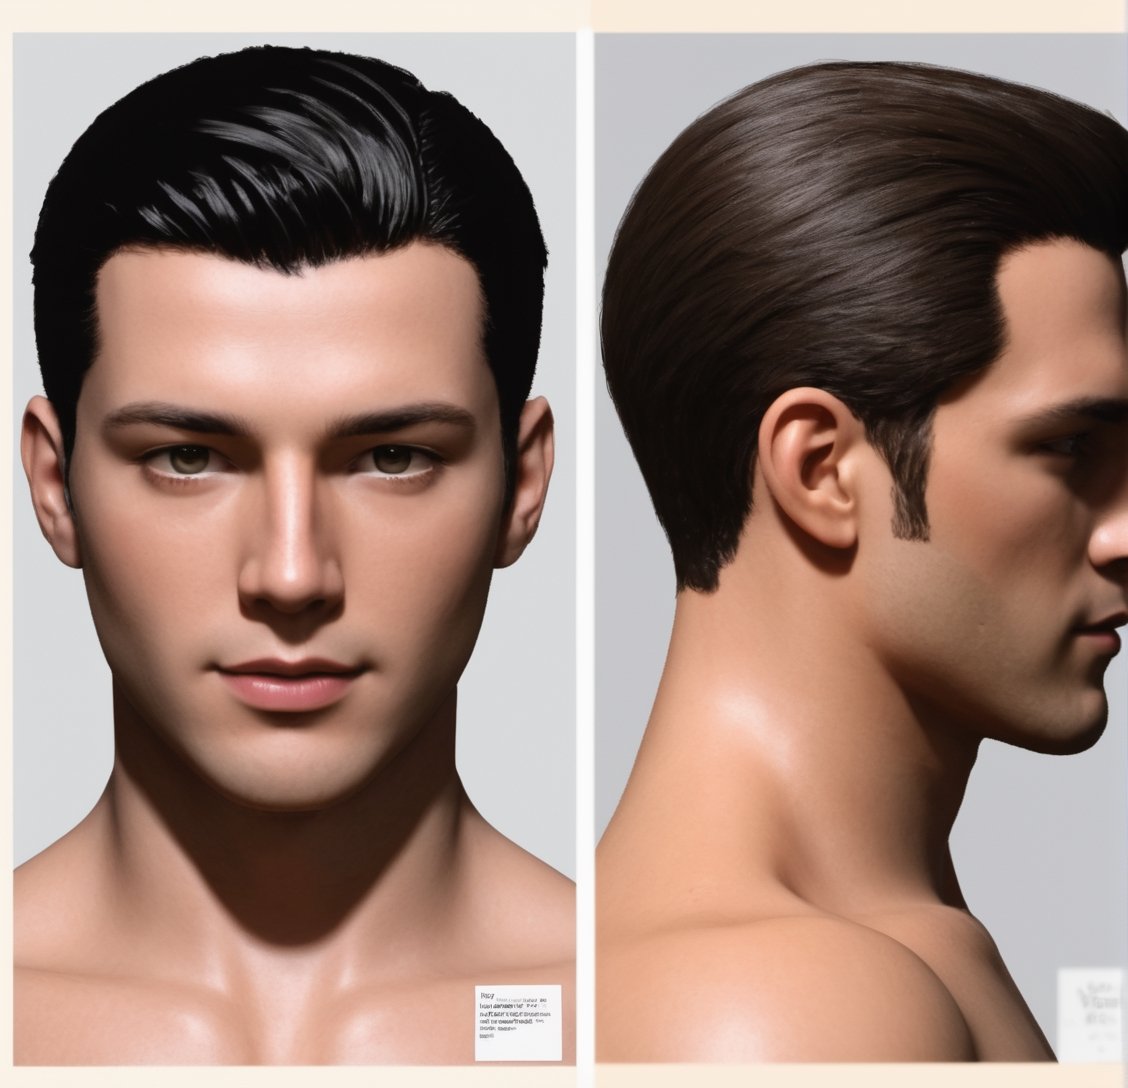 Generate a 3D model for use in AI of a man with brown hair and eyes and white skin based on these links:
https://www.facebook.com/photo/?fbid=7222619341193542&set=a.7222620204526789, https://www.facebook.com/photo/?fbid=7222619391193537&set=a.7222620204526789, https://www.facebook.com/photo/?fbid=7222619424526867&set=a.7222620204526789, https://www.facebook.com/photo/?fbid=7222619274526882&set=a.7222620204526789, https://www.facebook.com/photo/?fbid=7222617957860347&set=a.7222620204526789, https://www.facebook.com/photo/?fbid=7222619187860224&set=a.7222620204526789, https://www.facebook.com/photo/?fbid=7222618941193582&set=a.7222620204526789, https://www.facebook.com/photo/?fbid=7222619281193548&set=a.7222620204526789